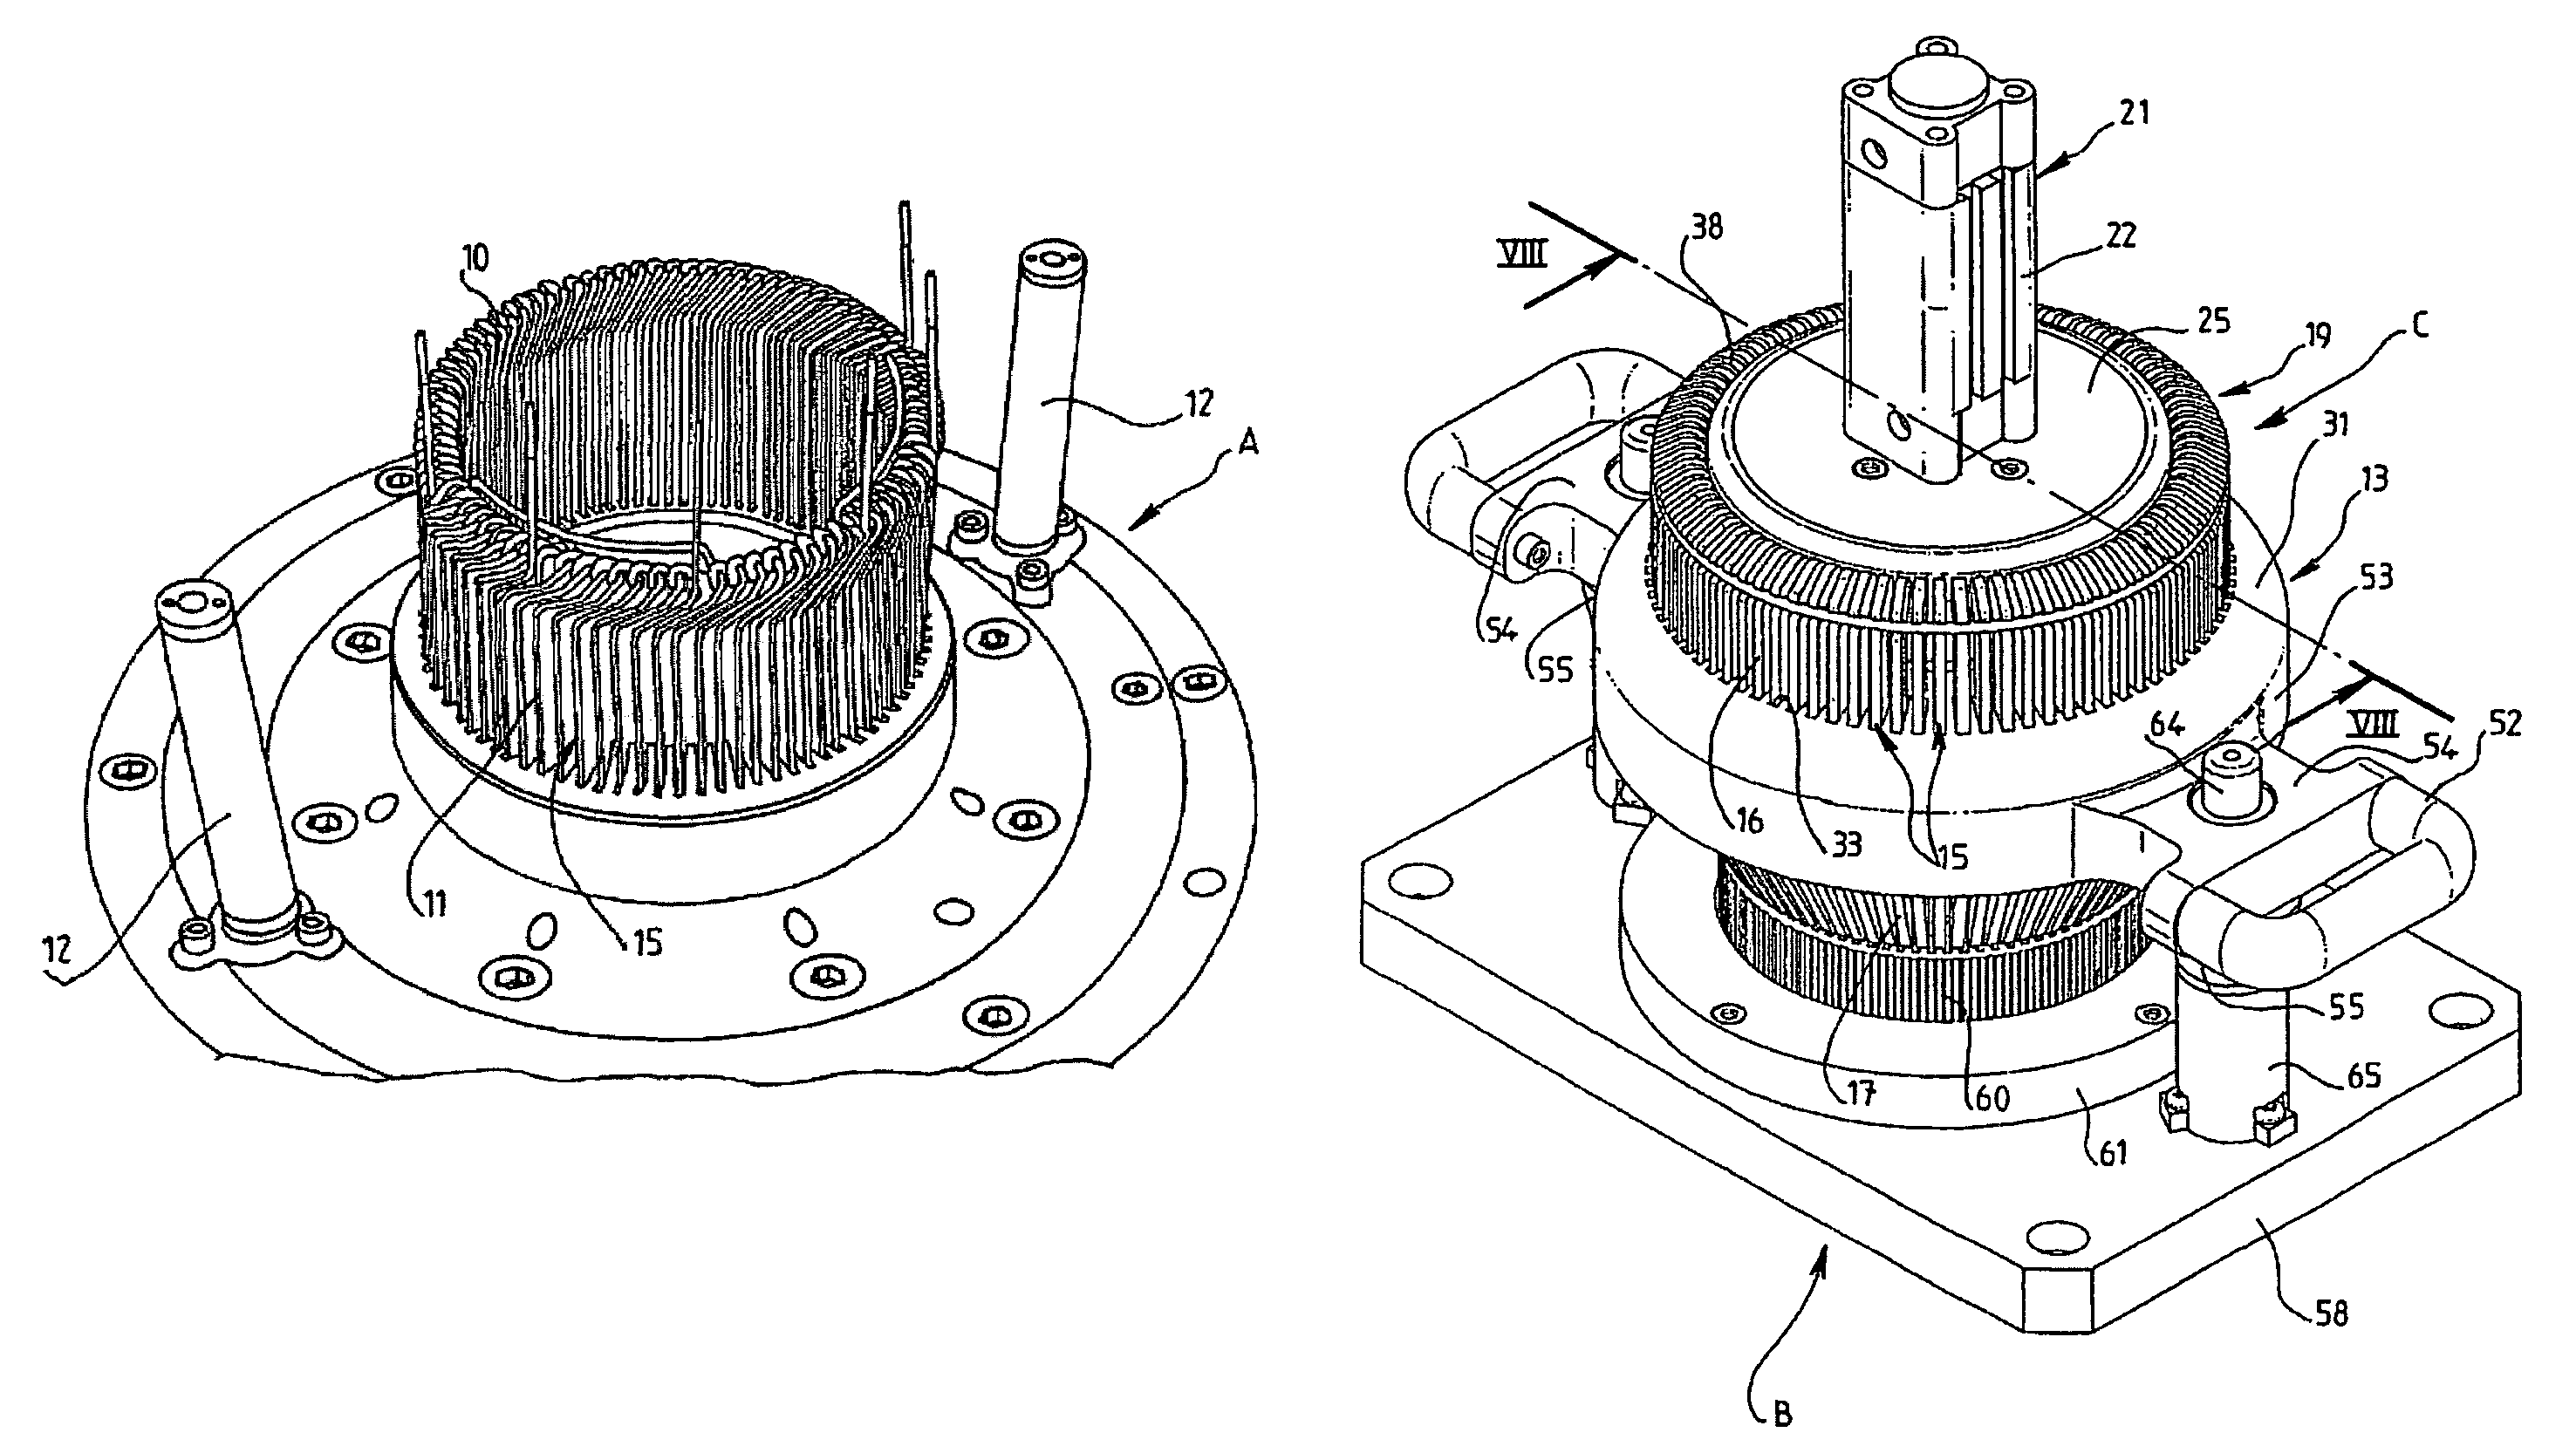 Device for gripping and transferring a ring of electrical conductors which is used to produce a winding and a winding-production system employing one such device